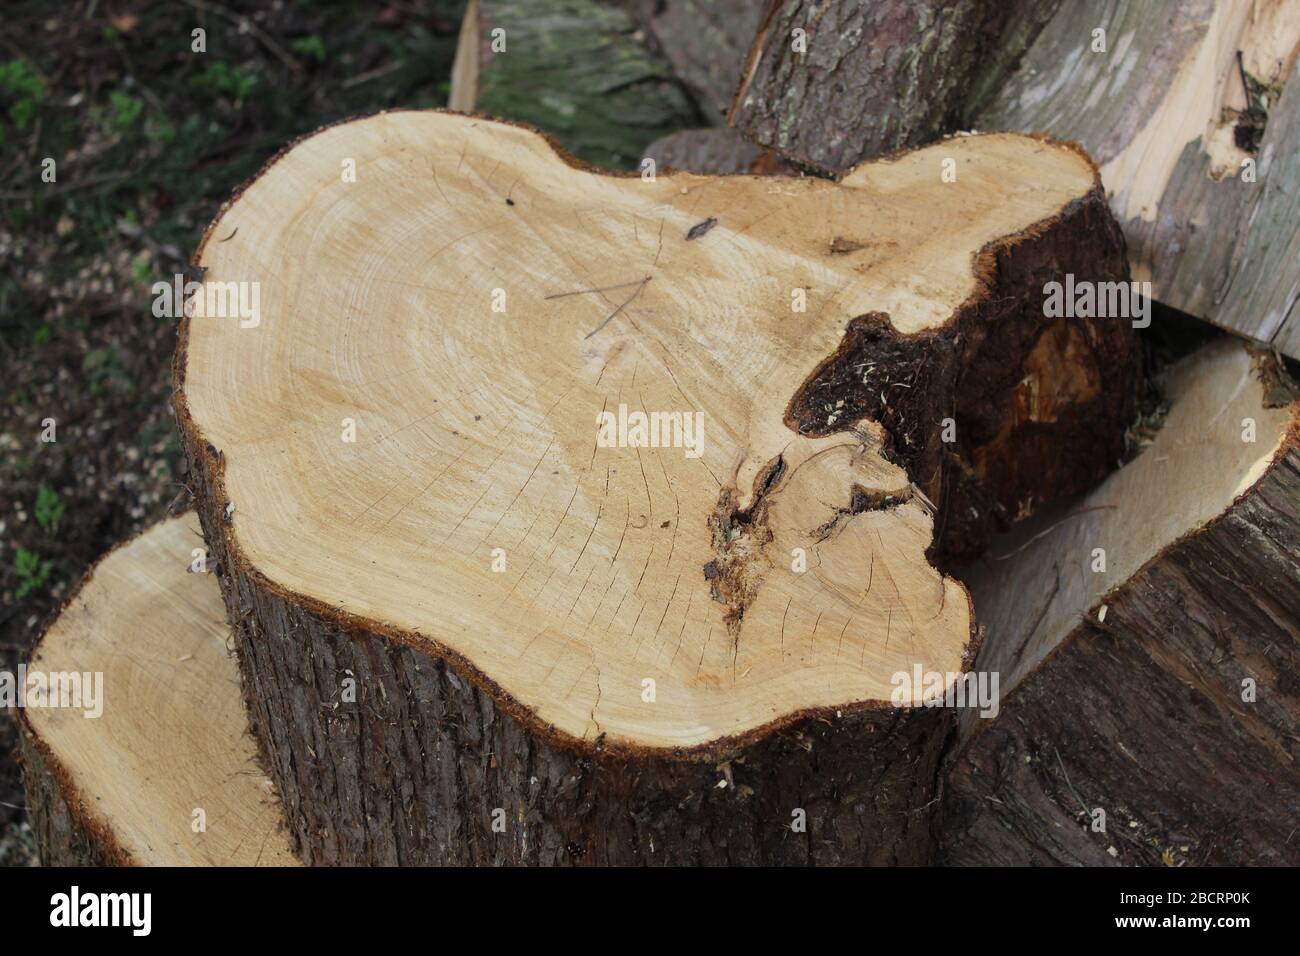 Pile of firewood chopped with chainsaws Stock Photo